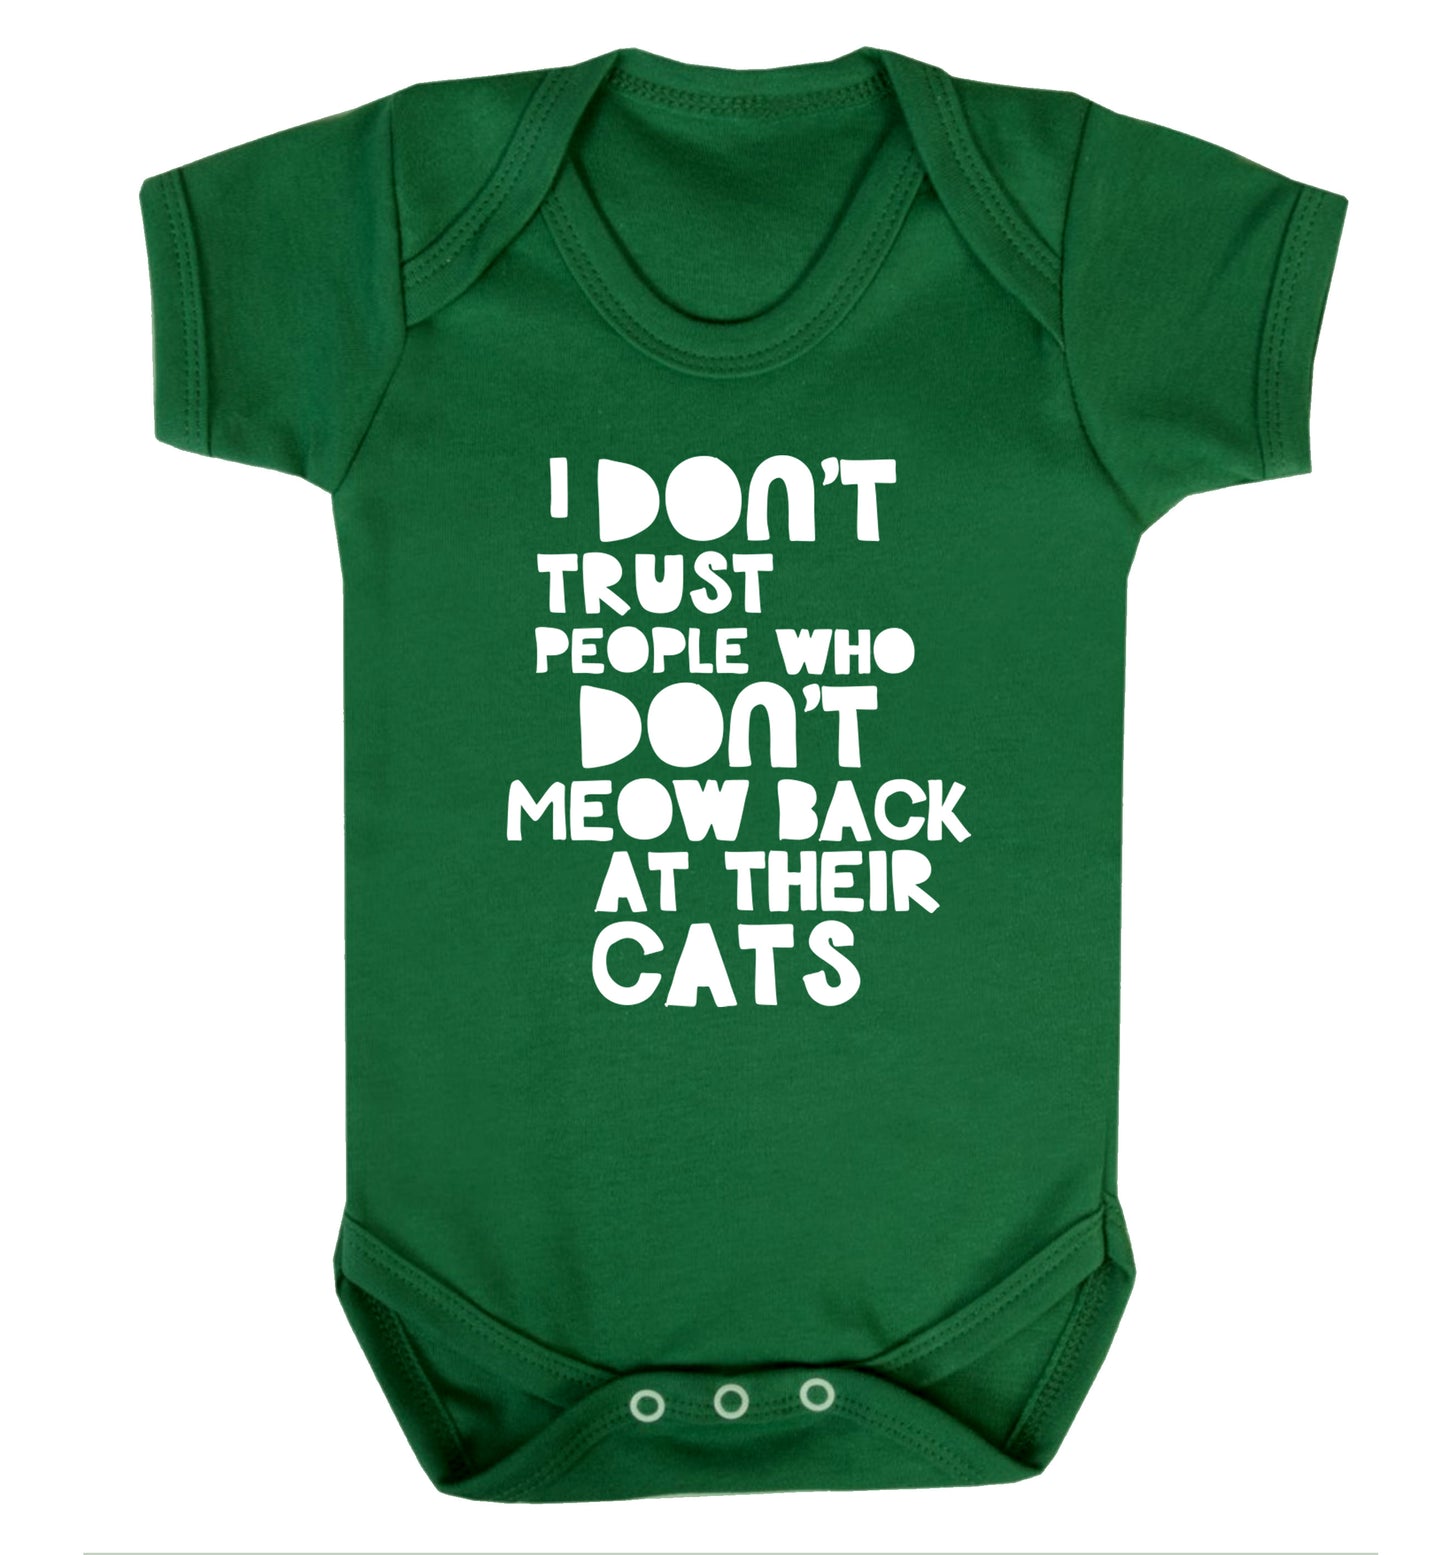 I don't trust people who don't meow back at their cats Baby Vest green 18-24 months